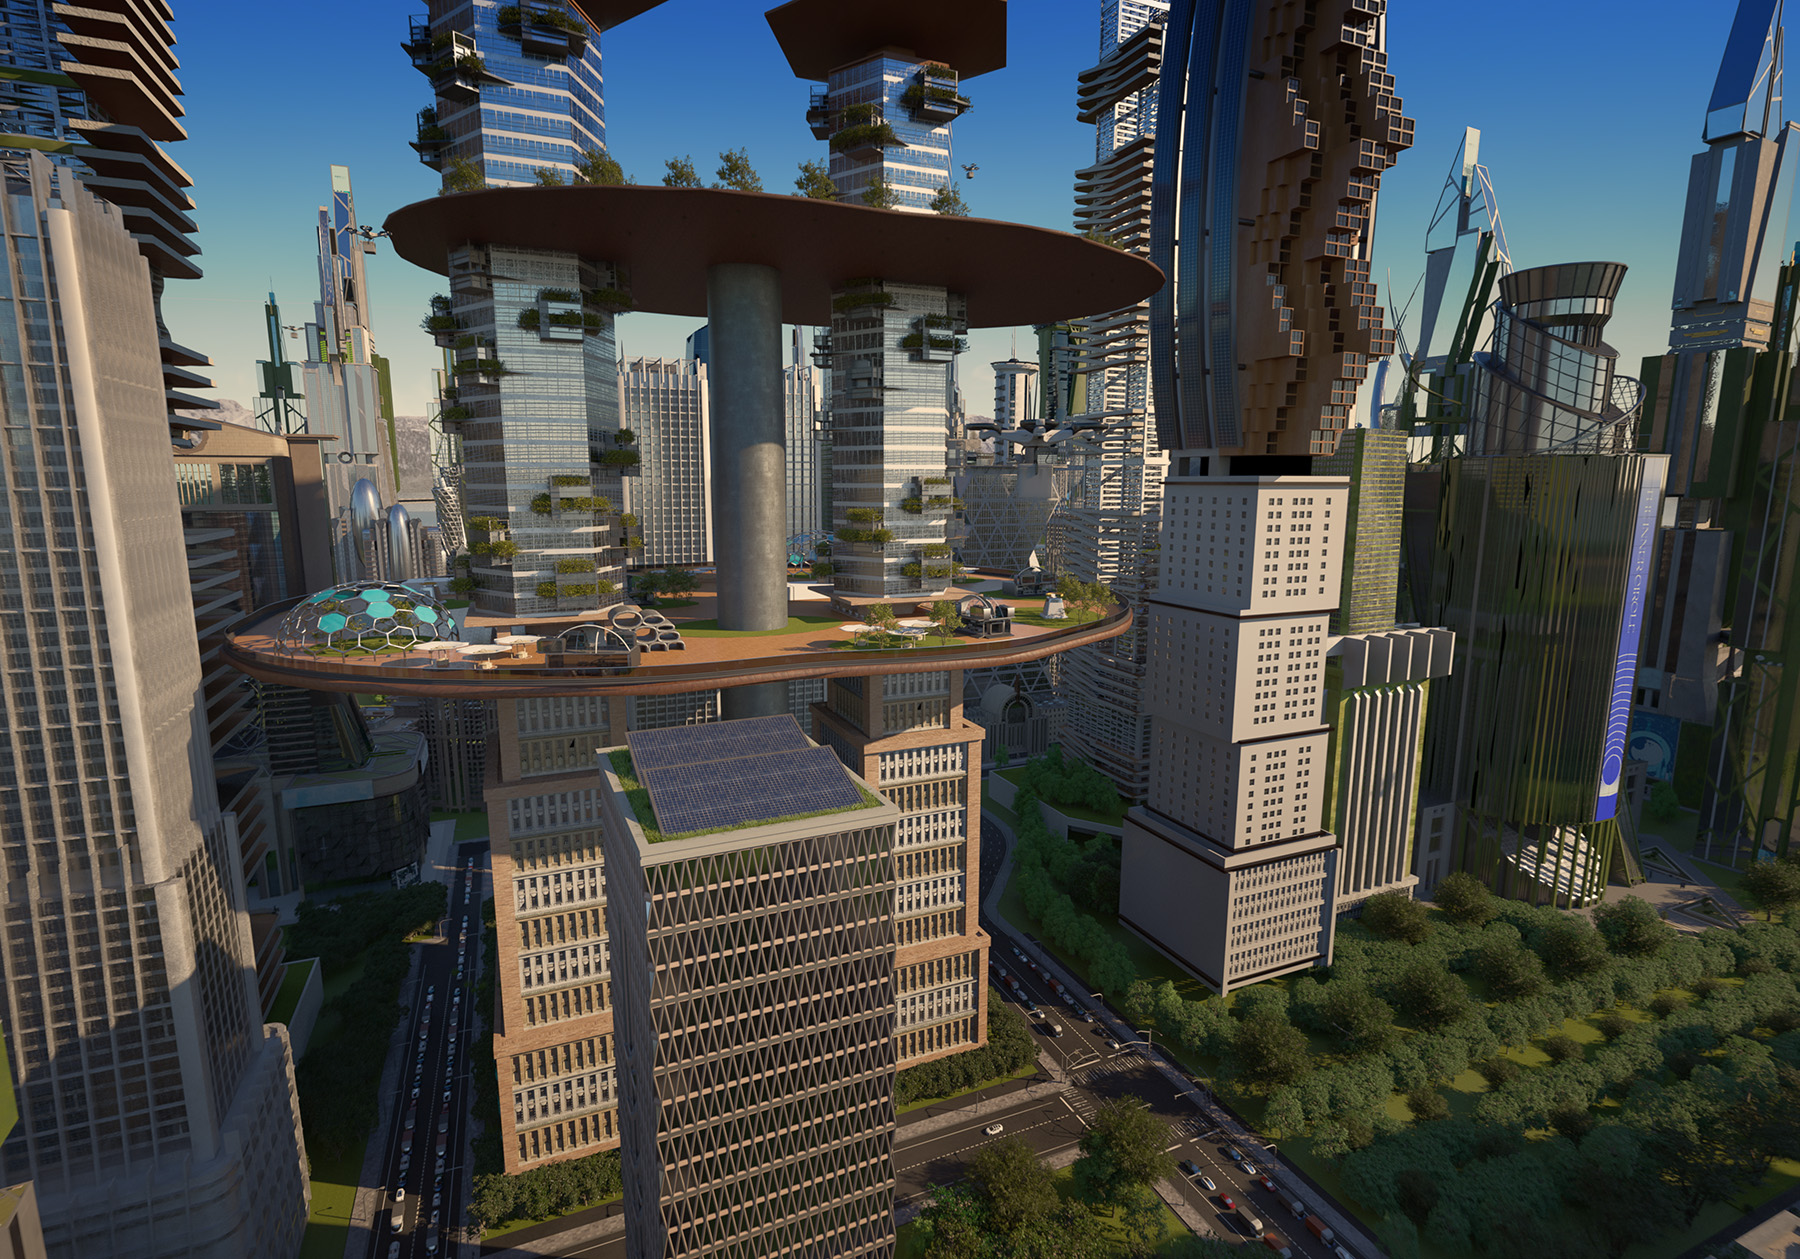 The image shows a futuristic skyline featuring towering structures with unusual designs including elevated platforms and nonlinear shapes. 